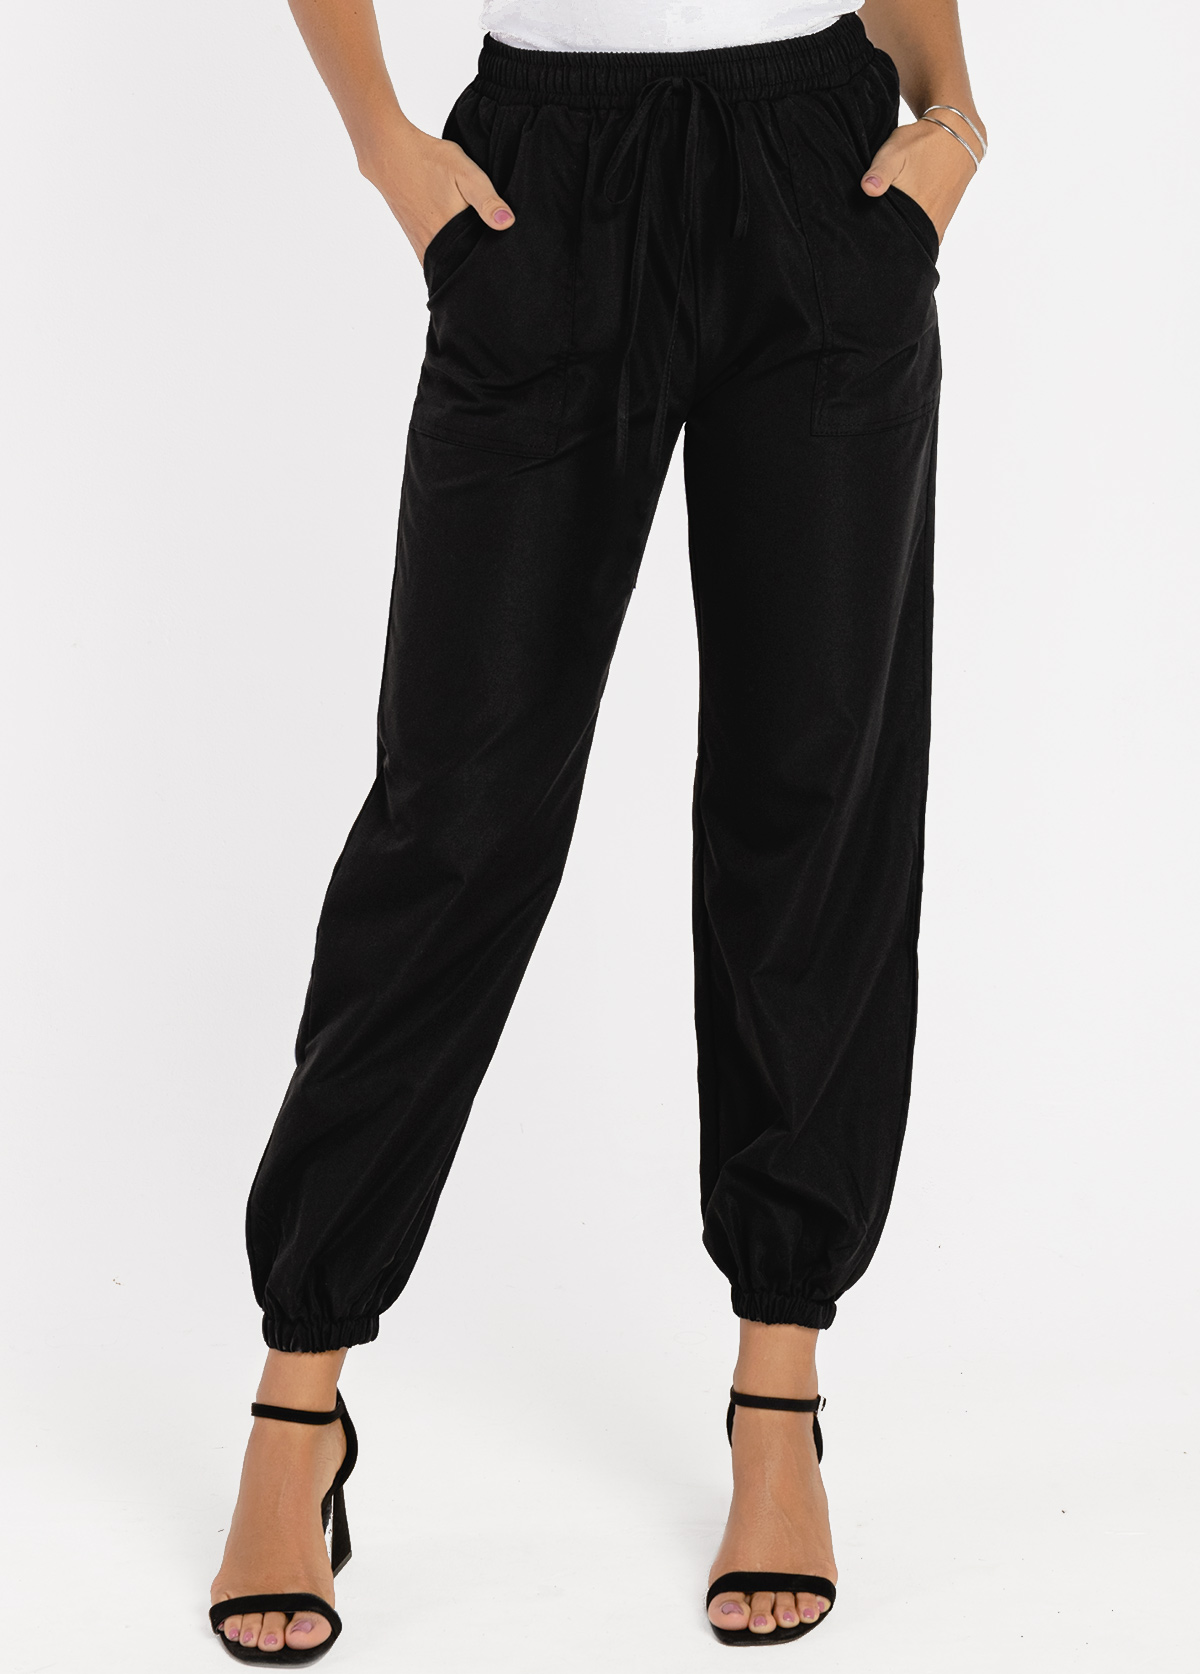 High Waisted Black Pocket Tie Front Pants